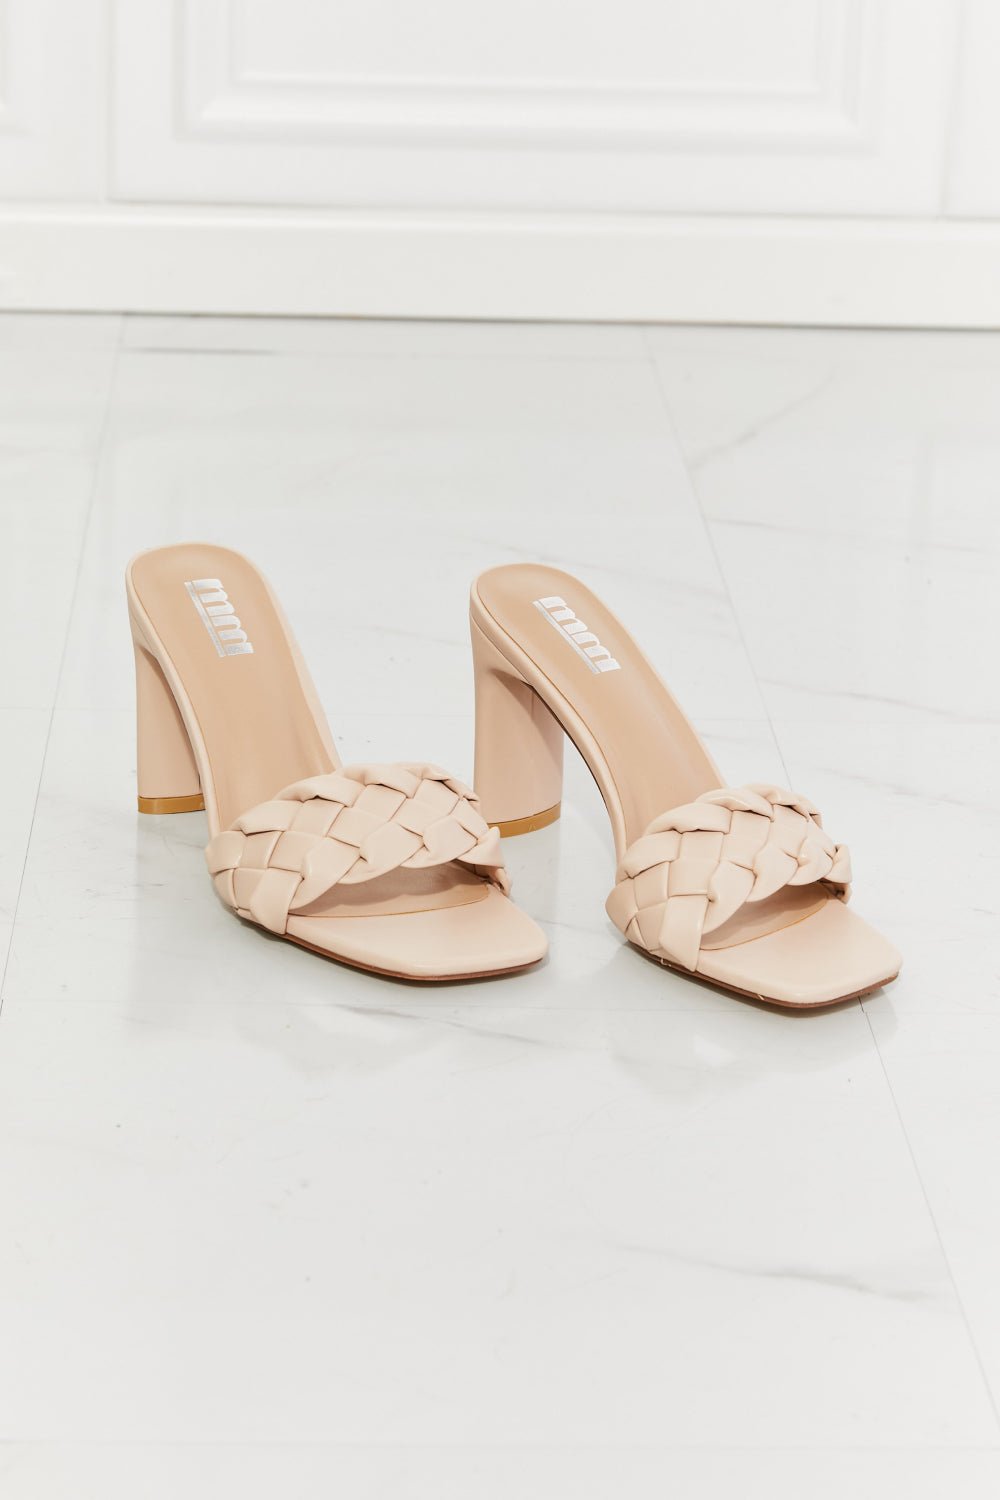 MMShoes Top of the World Braided Block Heel Sandals in Beige - OMG! Rose